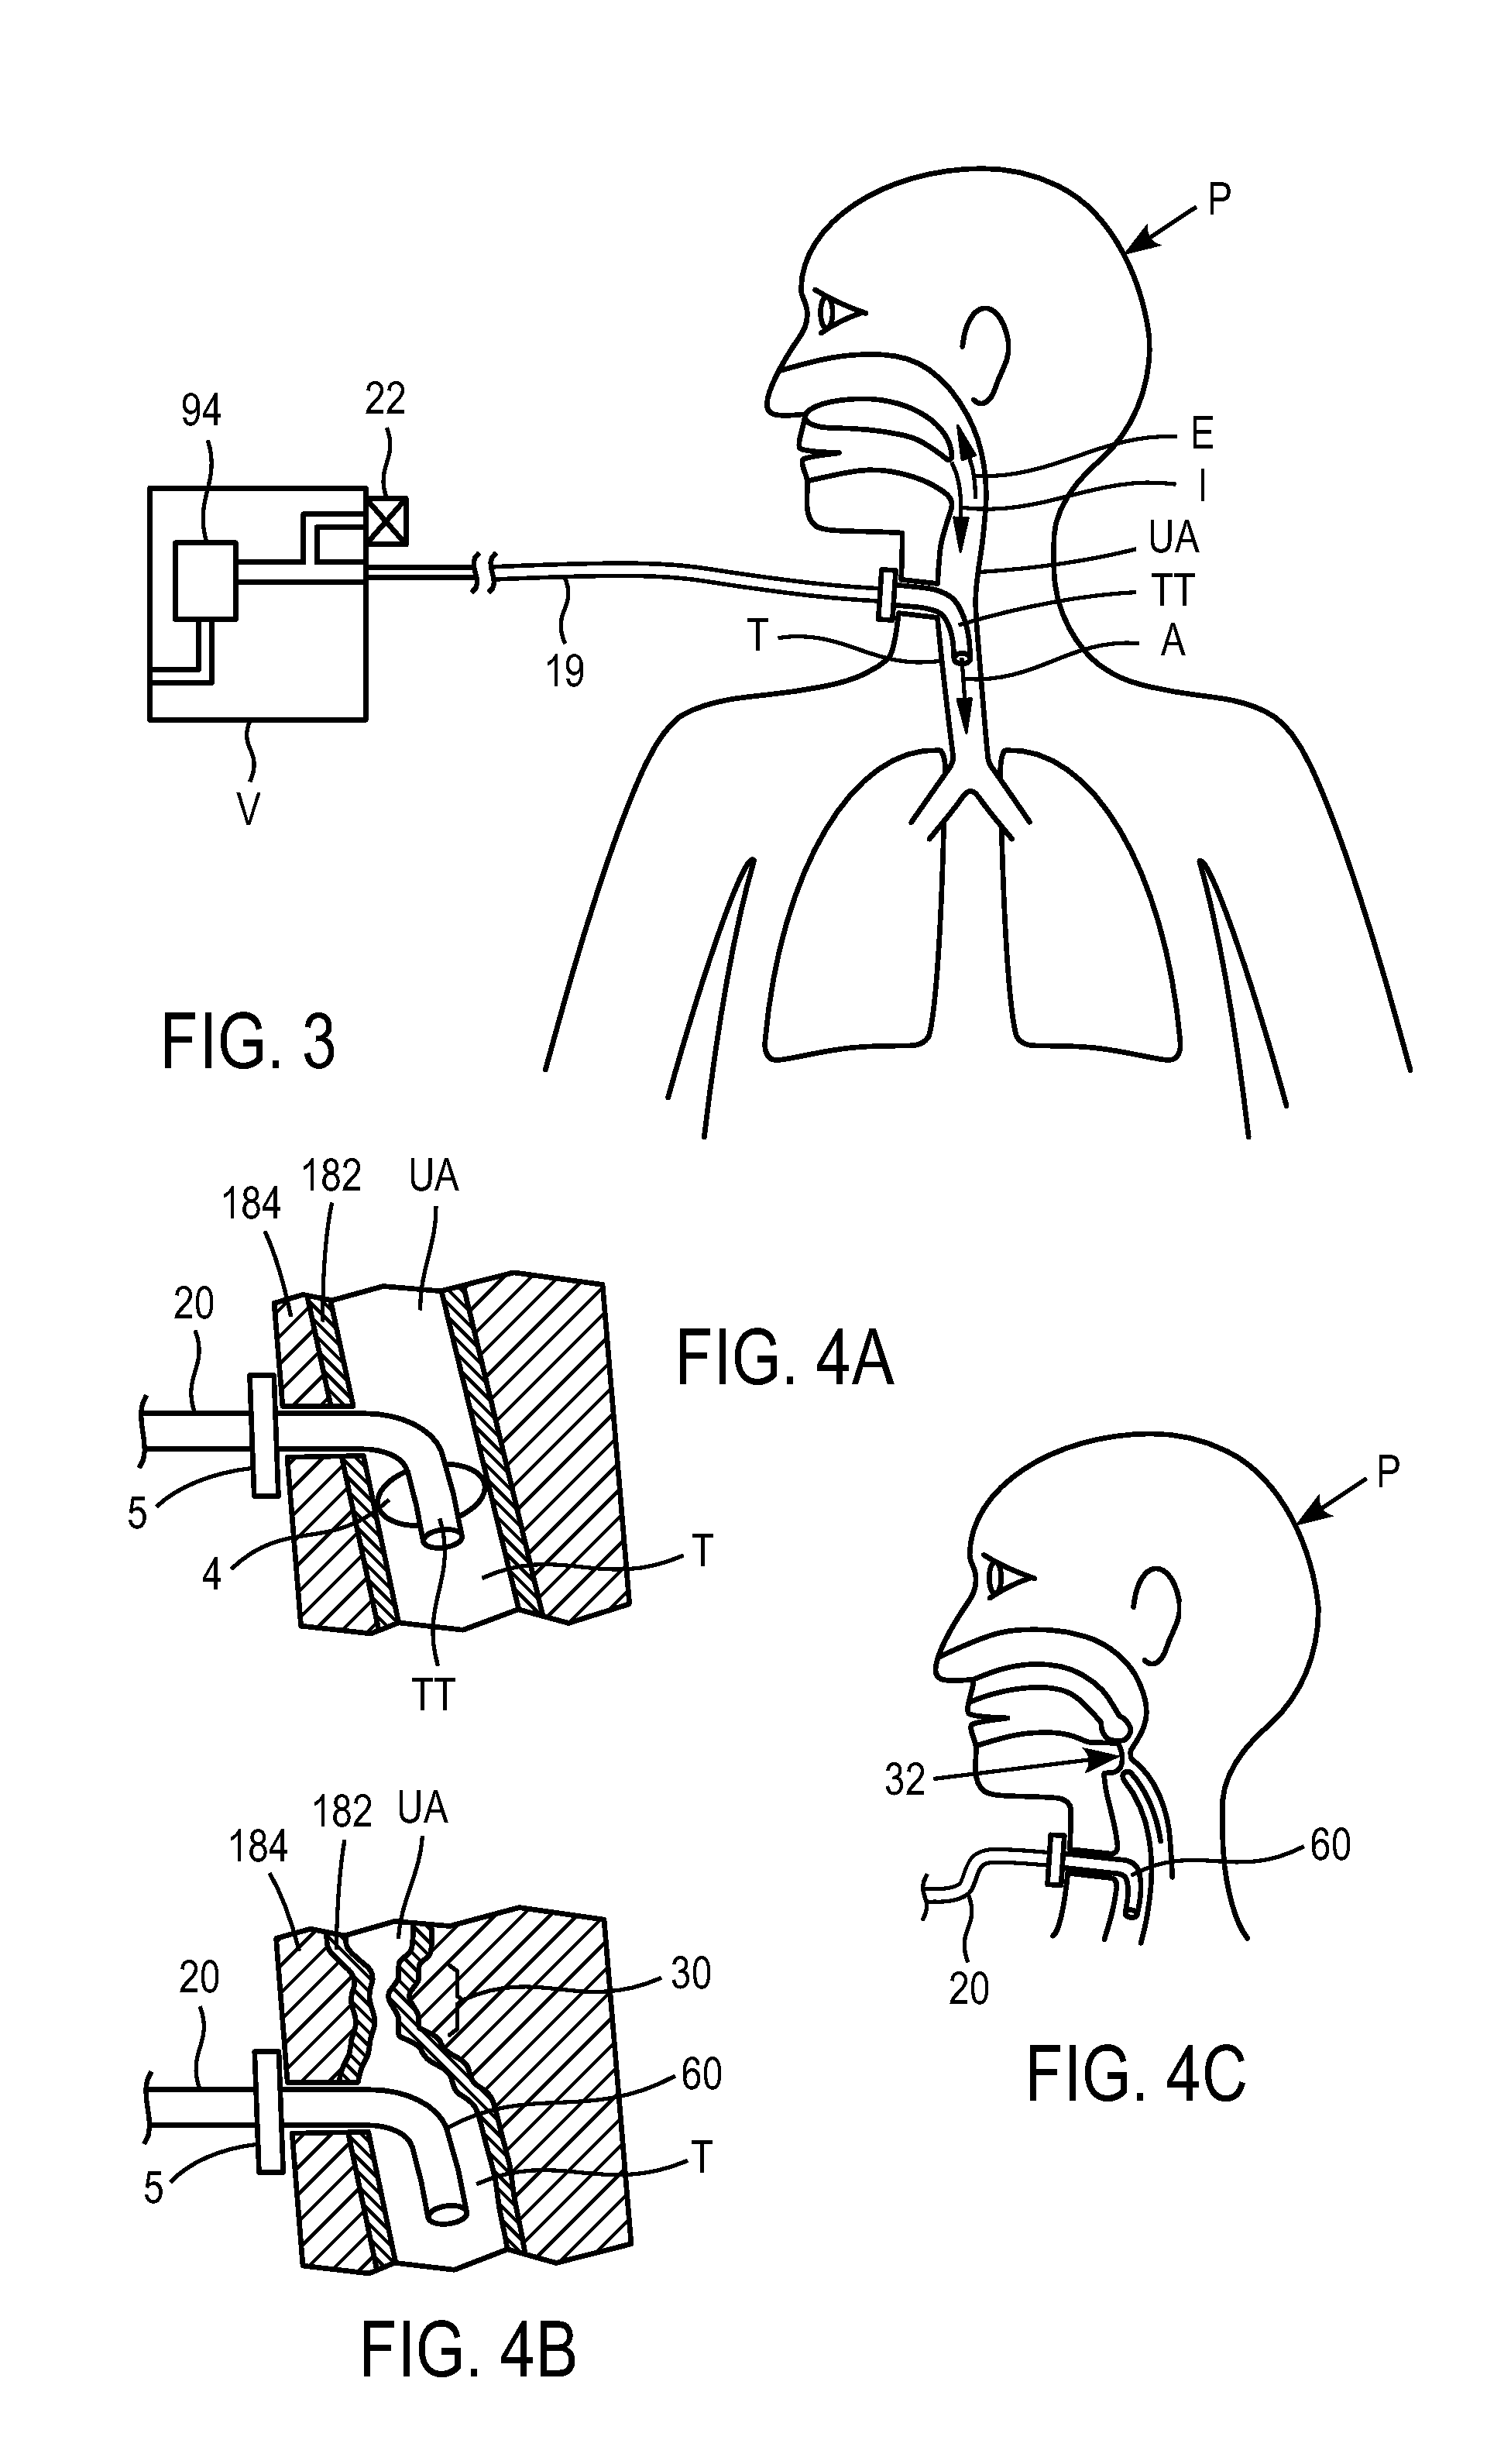 Methods and devices for providing inspiratory and expiratory flow relief during ventilation therapy